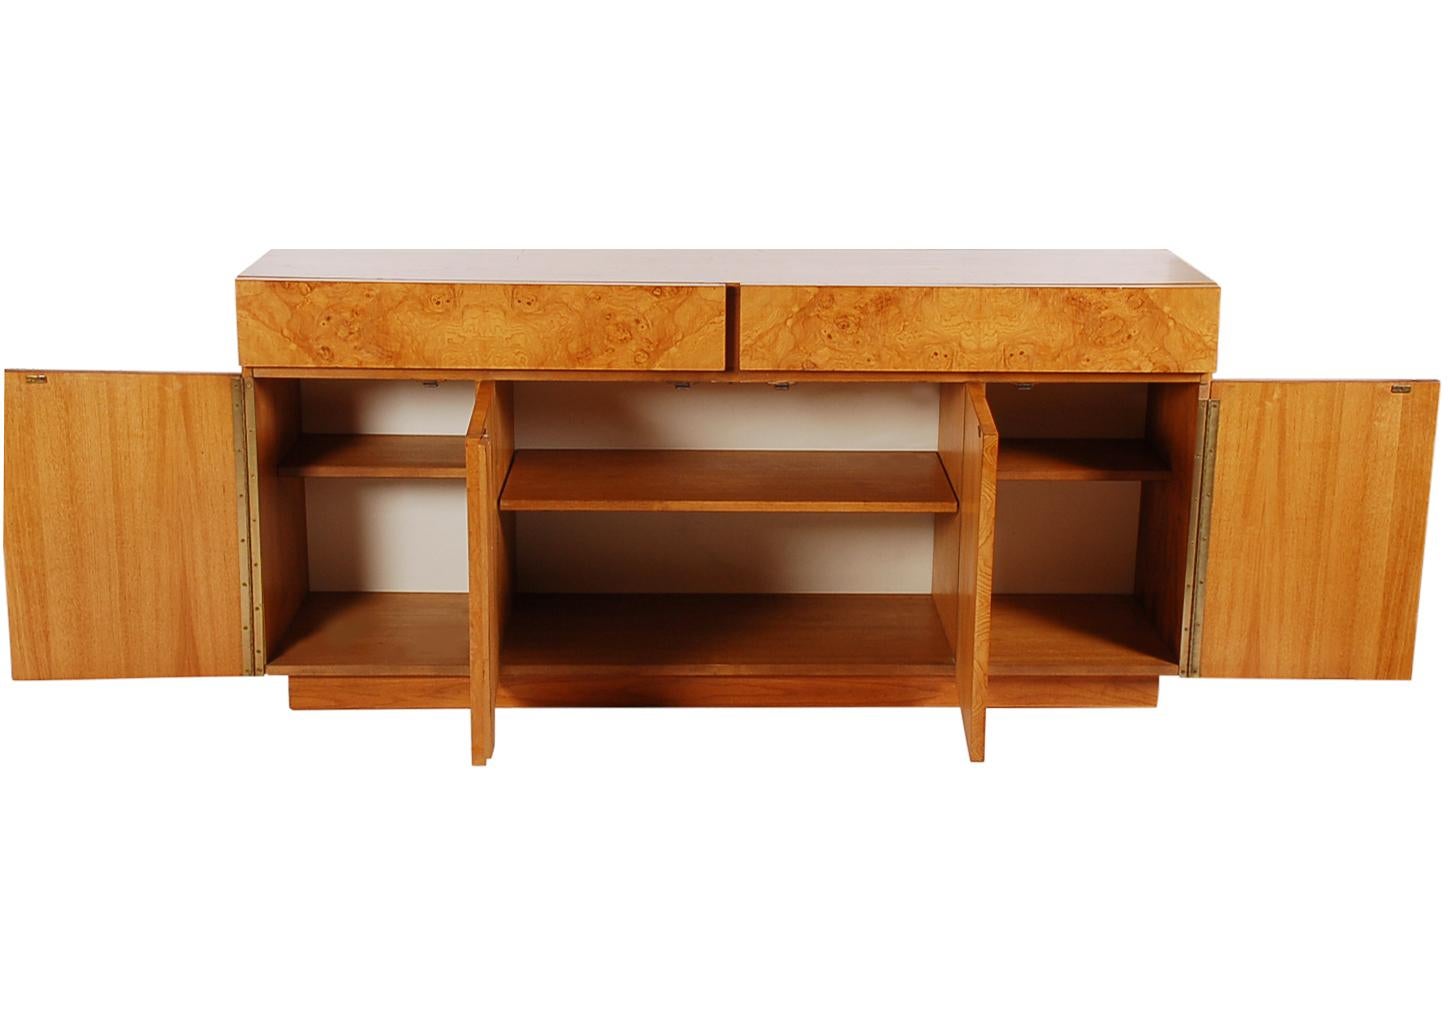 Late 20th Century Mid-Century Modern Burl Cabinet or Credenza by Roland Carter for Lane